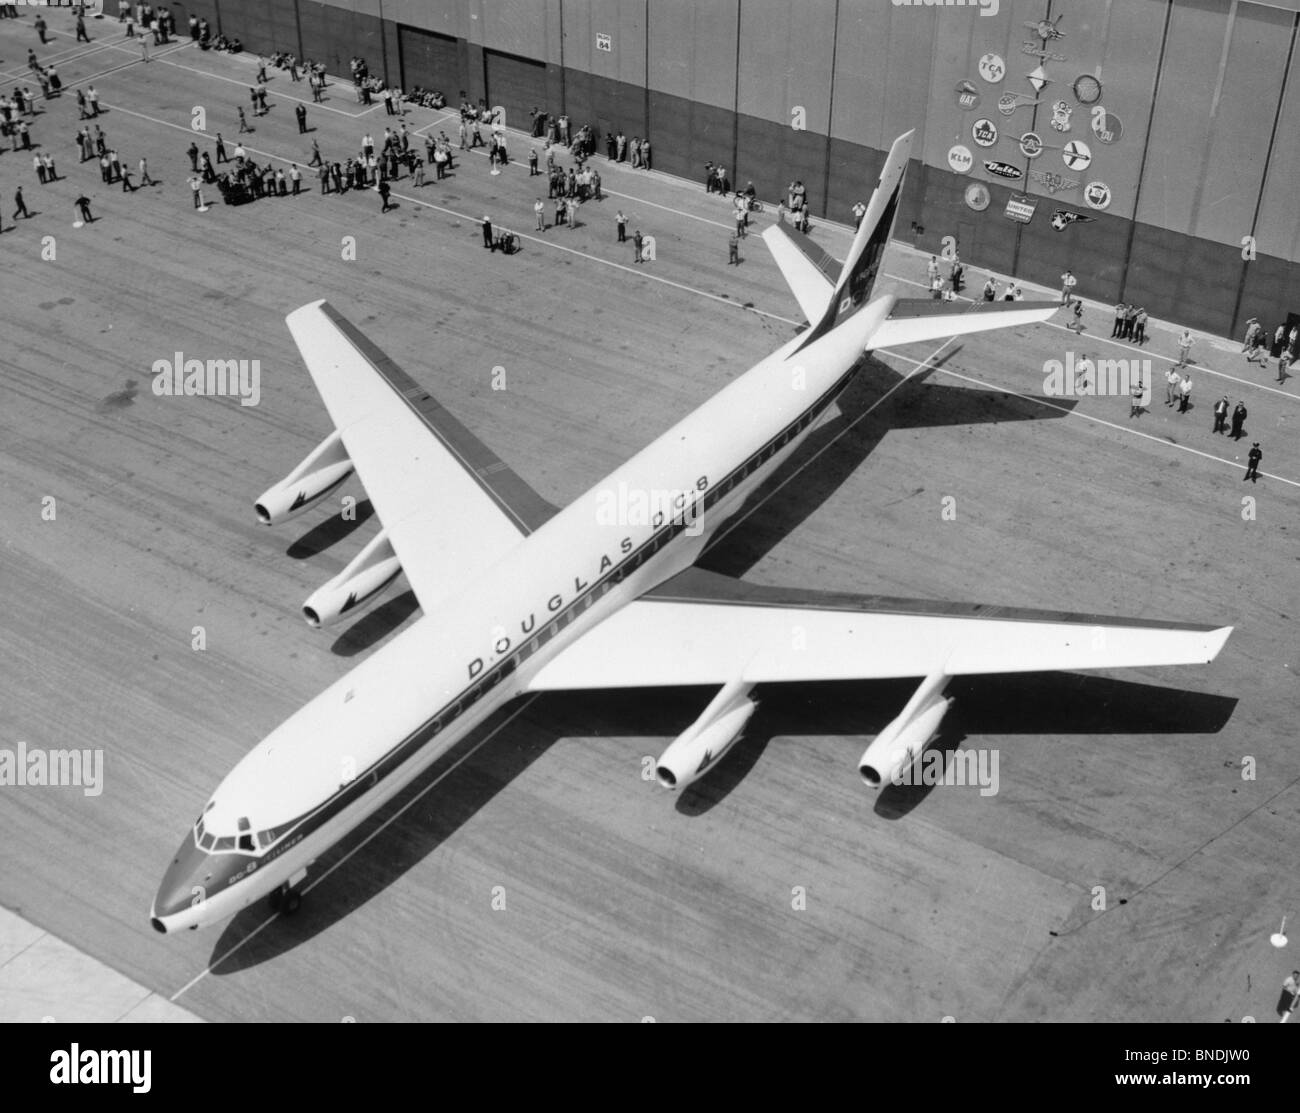 Aerial View Of Douglas Dc 8 Airplane At Airport Stock Photo